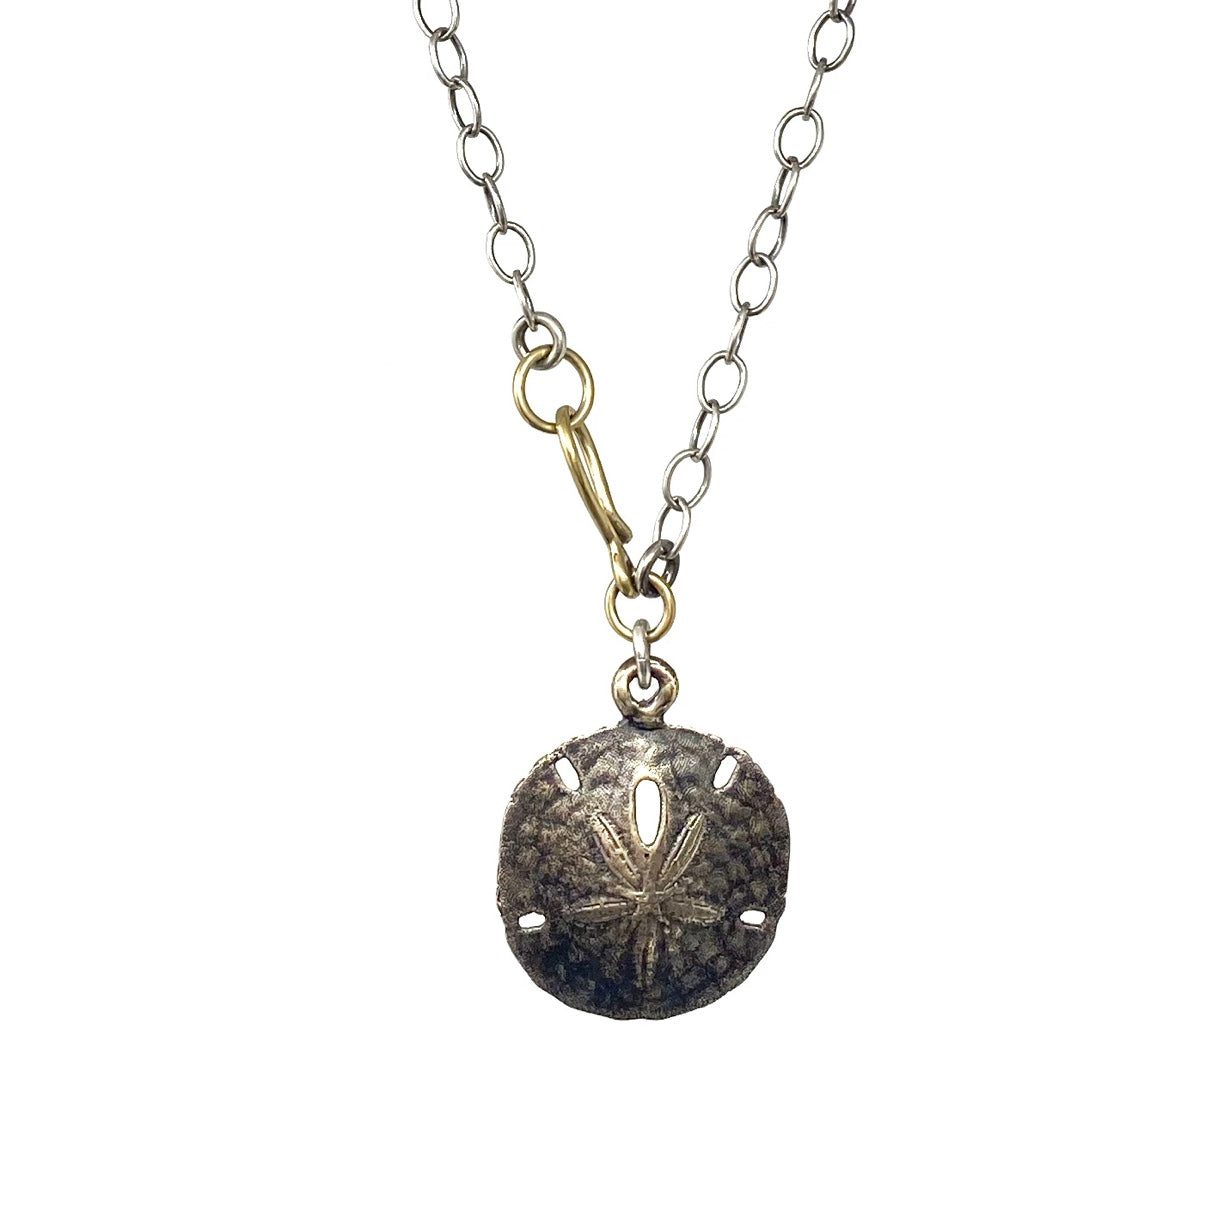 Shannon Koszyk - Sterling and Bronze Sand Dollar Necklace